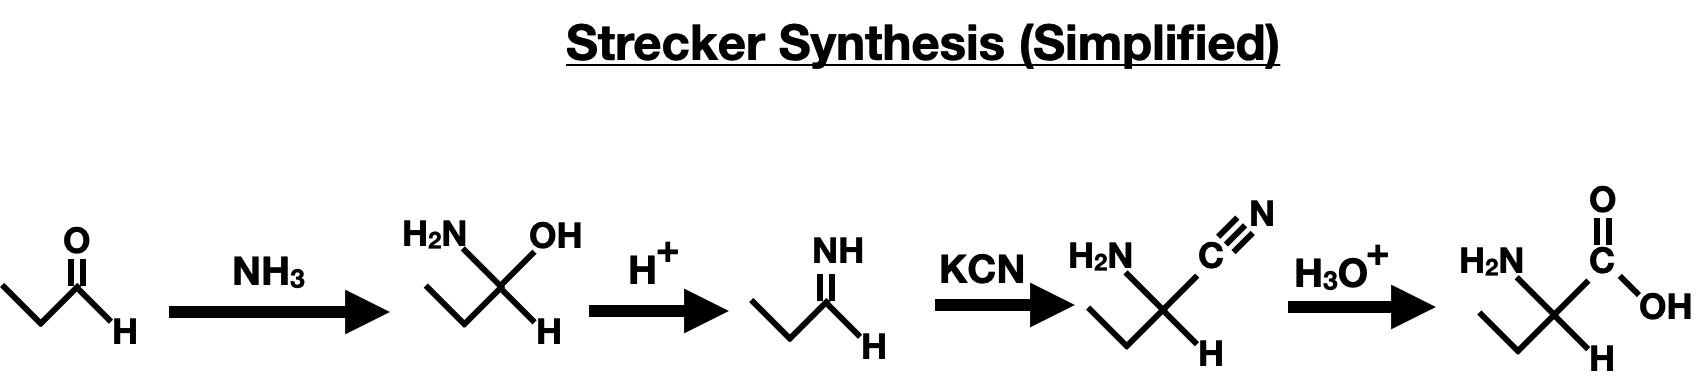 Amino Acid Synthesis and Protection Reactions - strecker synthesis